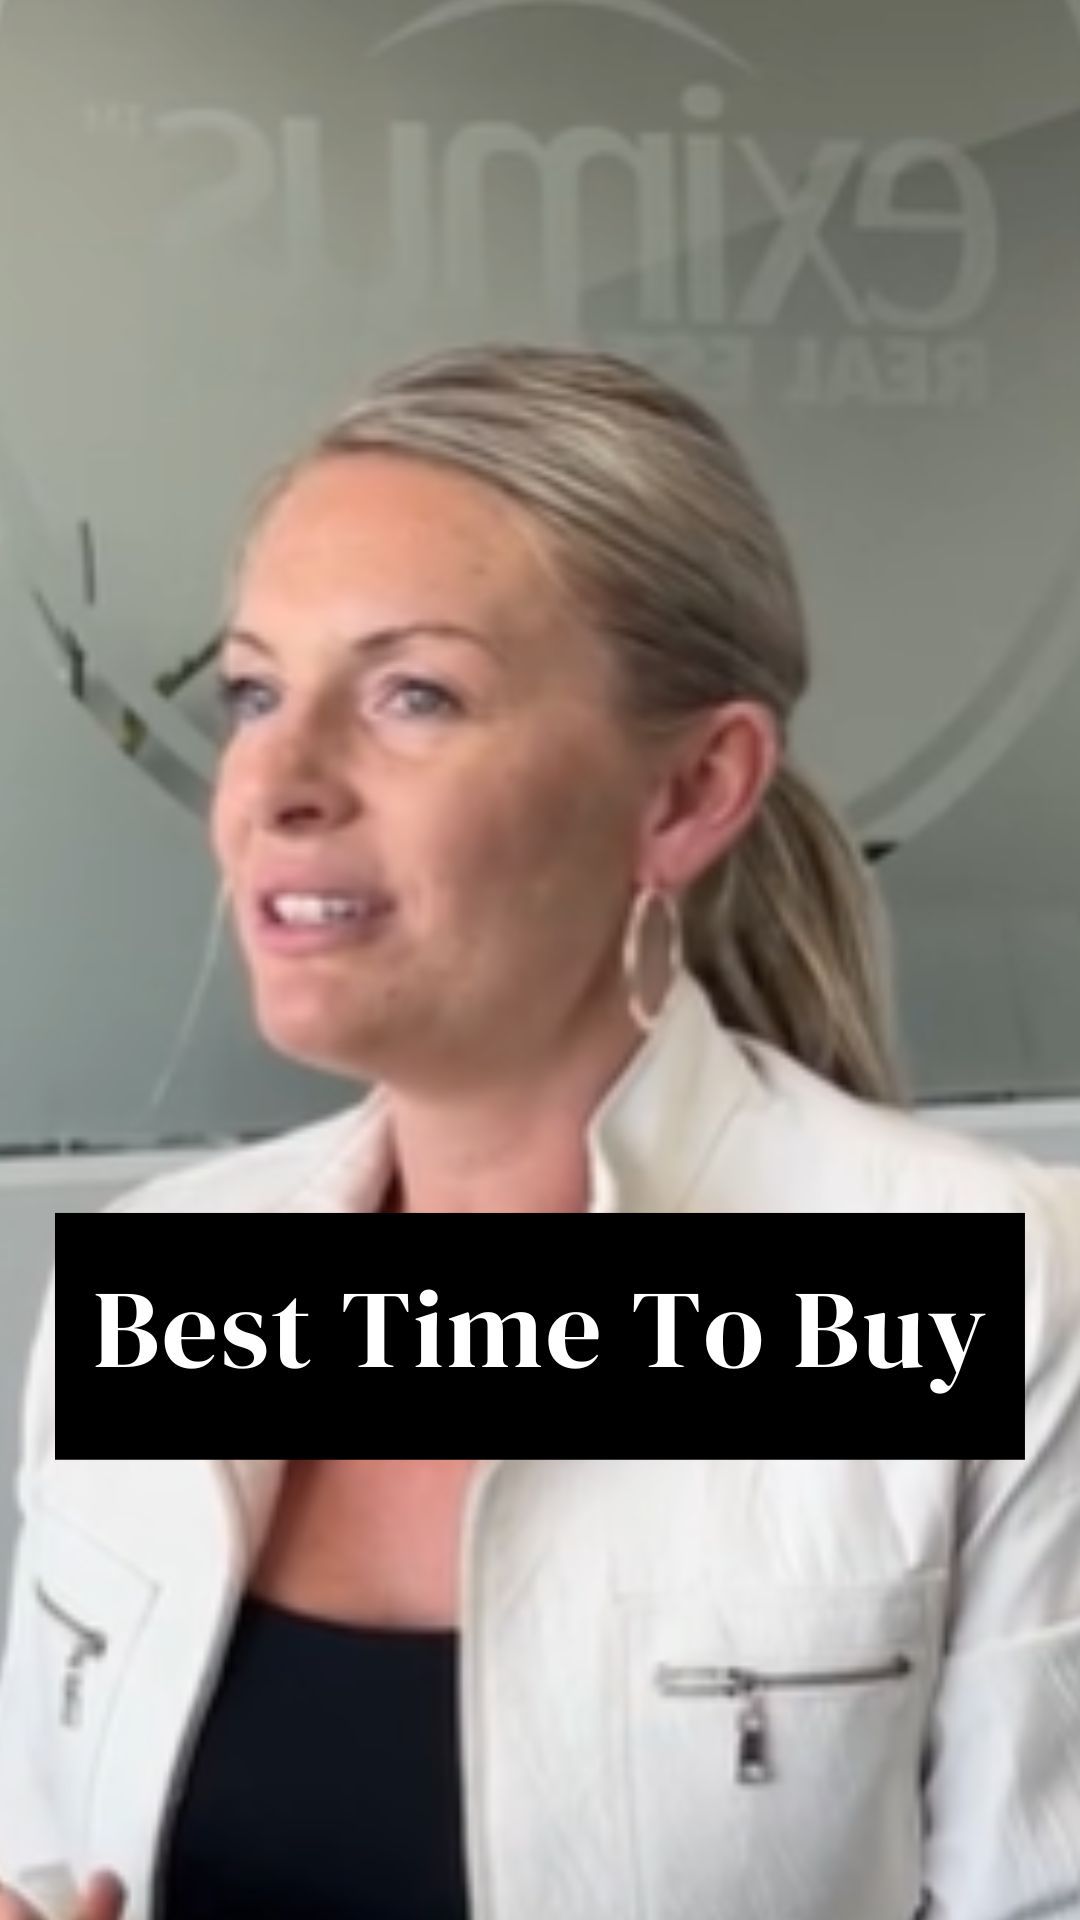 Best Time To Buy!